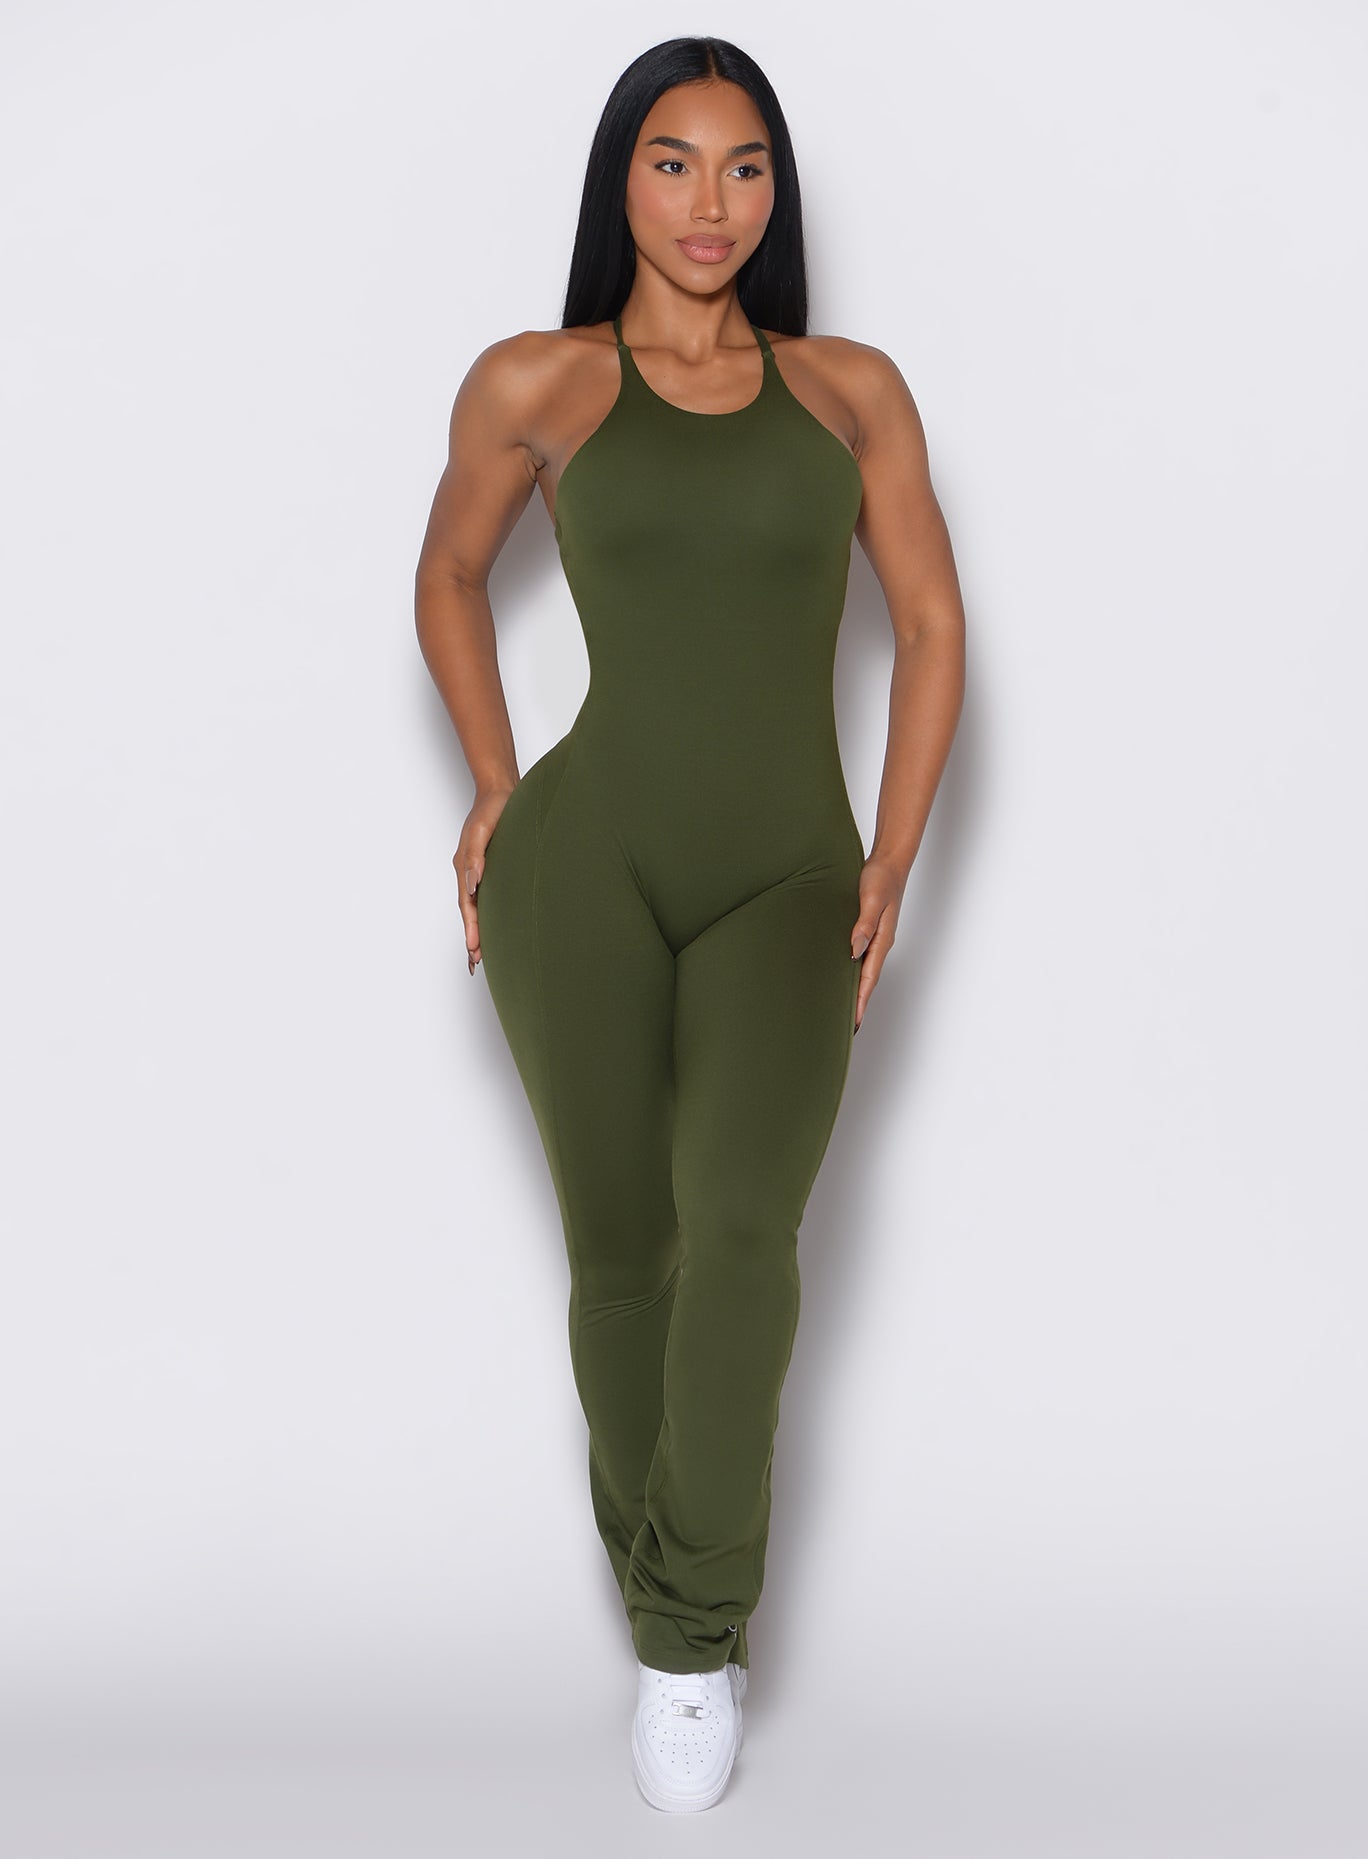 Front profile view of a model wearing the Bombshell Bunny Bodysuit in Jungle color